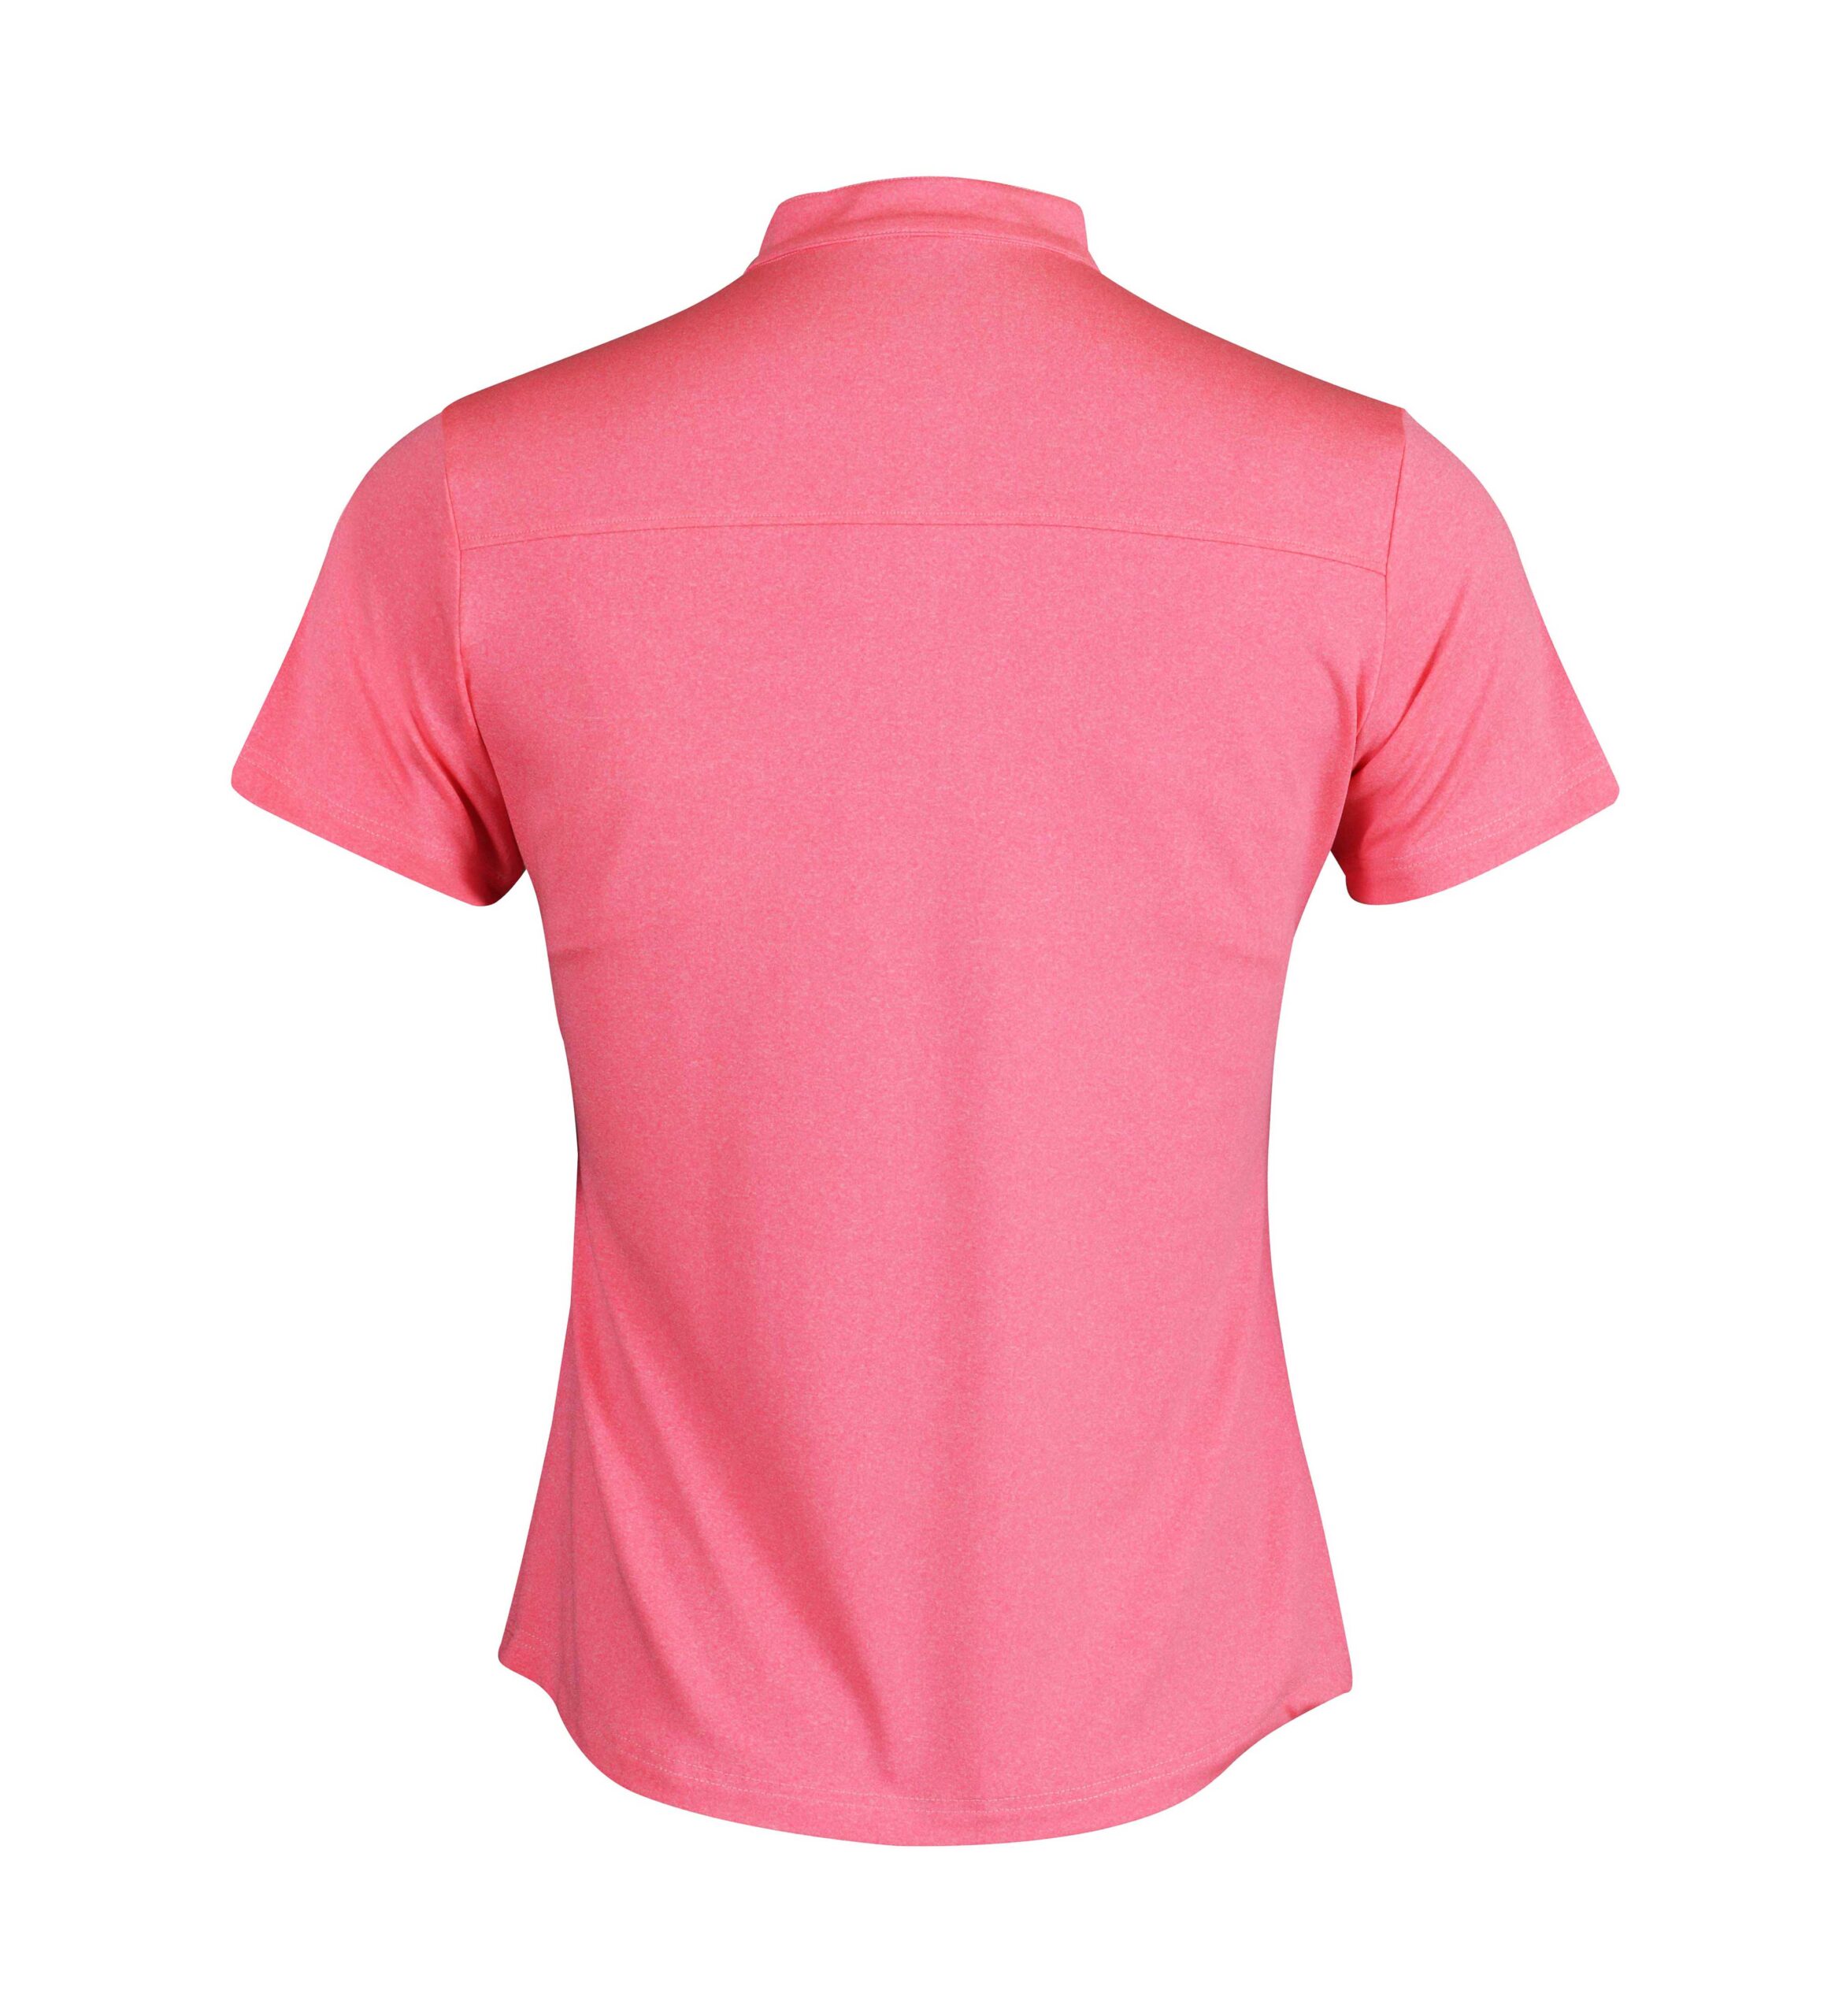 Polo Shirt Without Buttons – Technics Garments